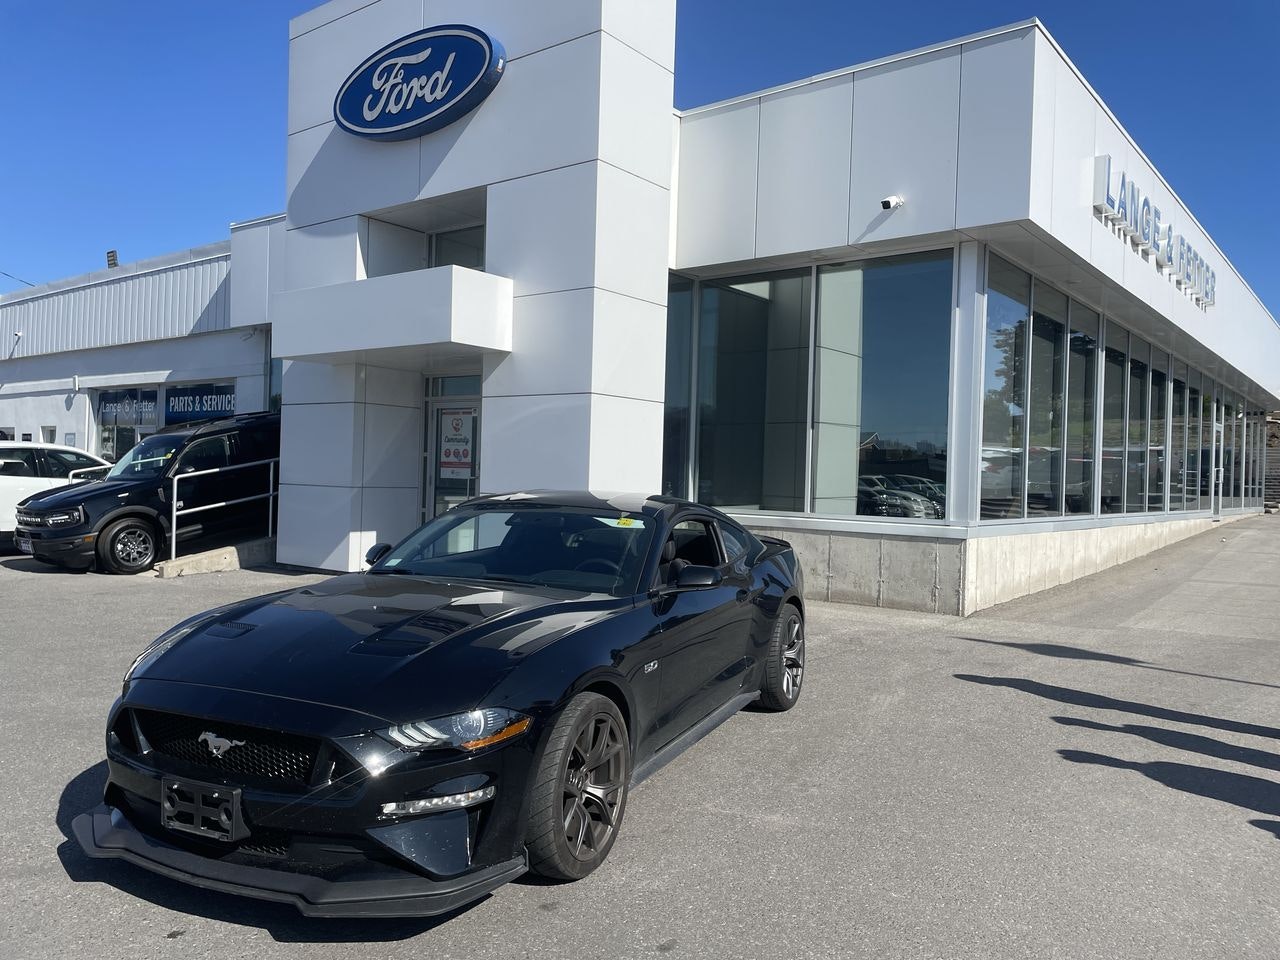 2019 Ford Mustang - P21400 Full Image 1